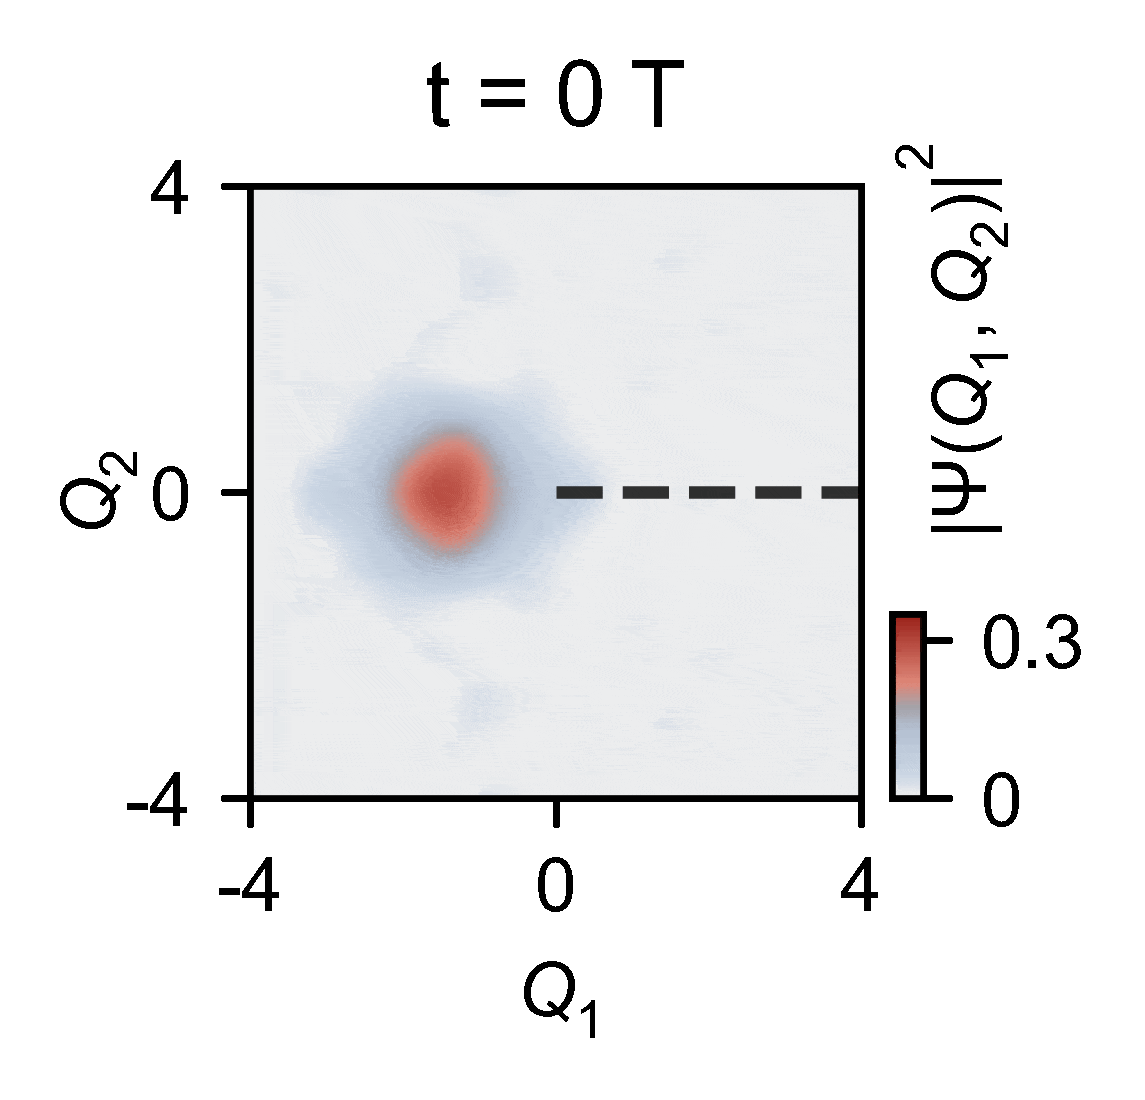 Researchers then constructed a movie of the ion’s evolution around the conical intersection (see GIF). Each frame of the GIF shows an image outlining the probability of finding the ion at a specific set of coordinates.